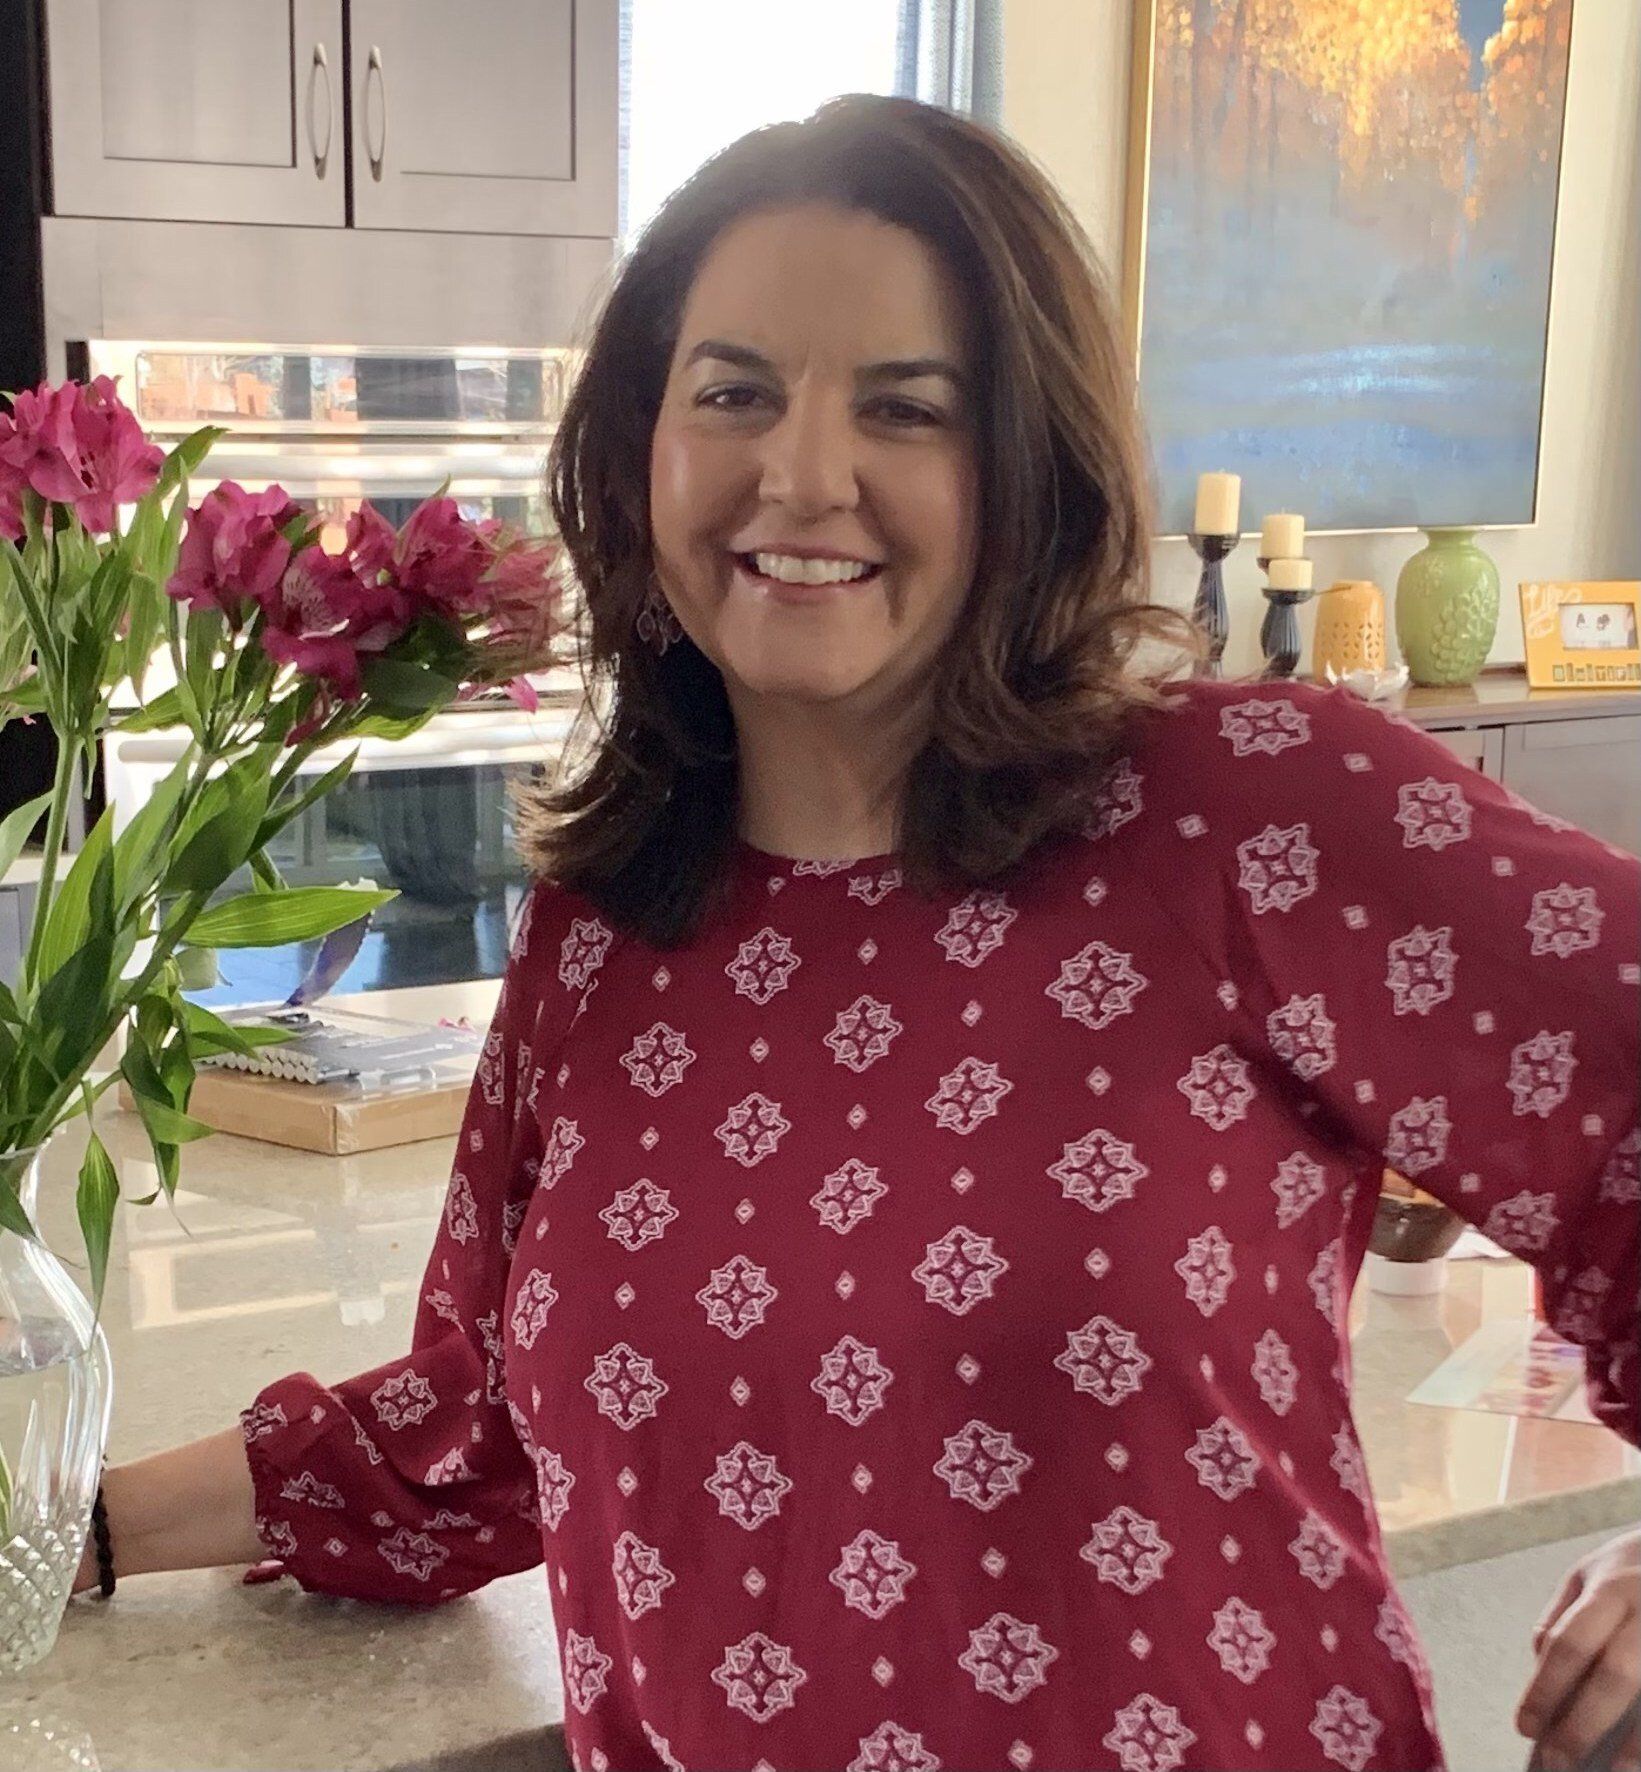 A close up photo of Melissa Uribes, a lighter skinned woman with shoulder length brown hair. Melissa is wearing a pinky-red top with a white pattern printed on it. a vase of flowers can be seen to her right.